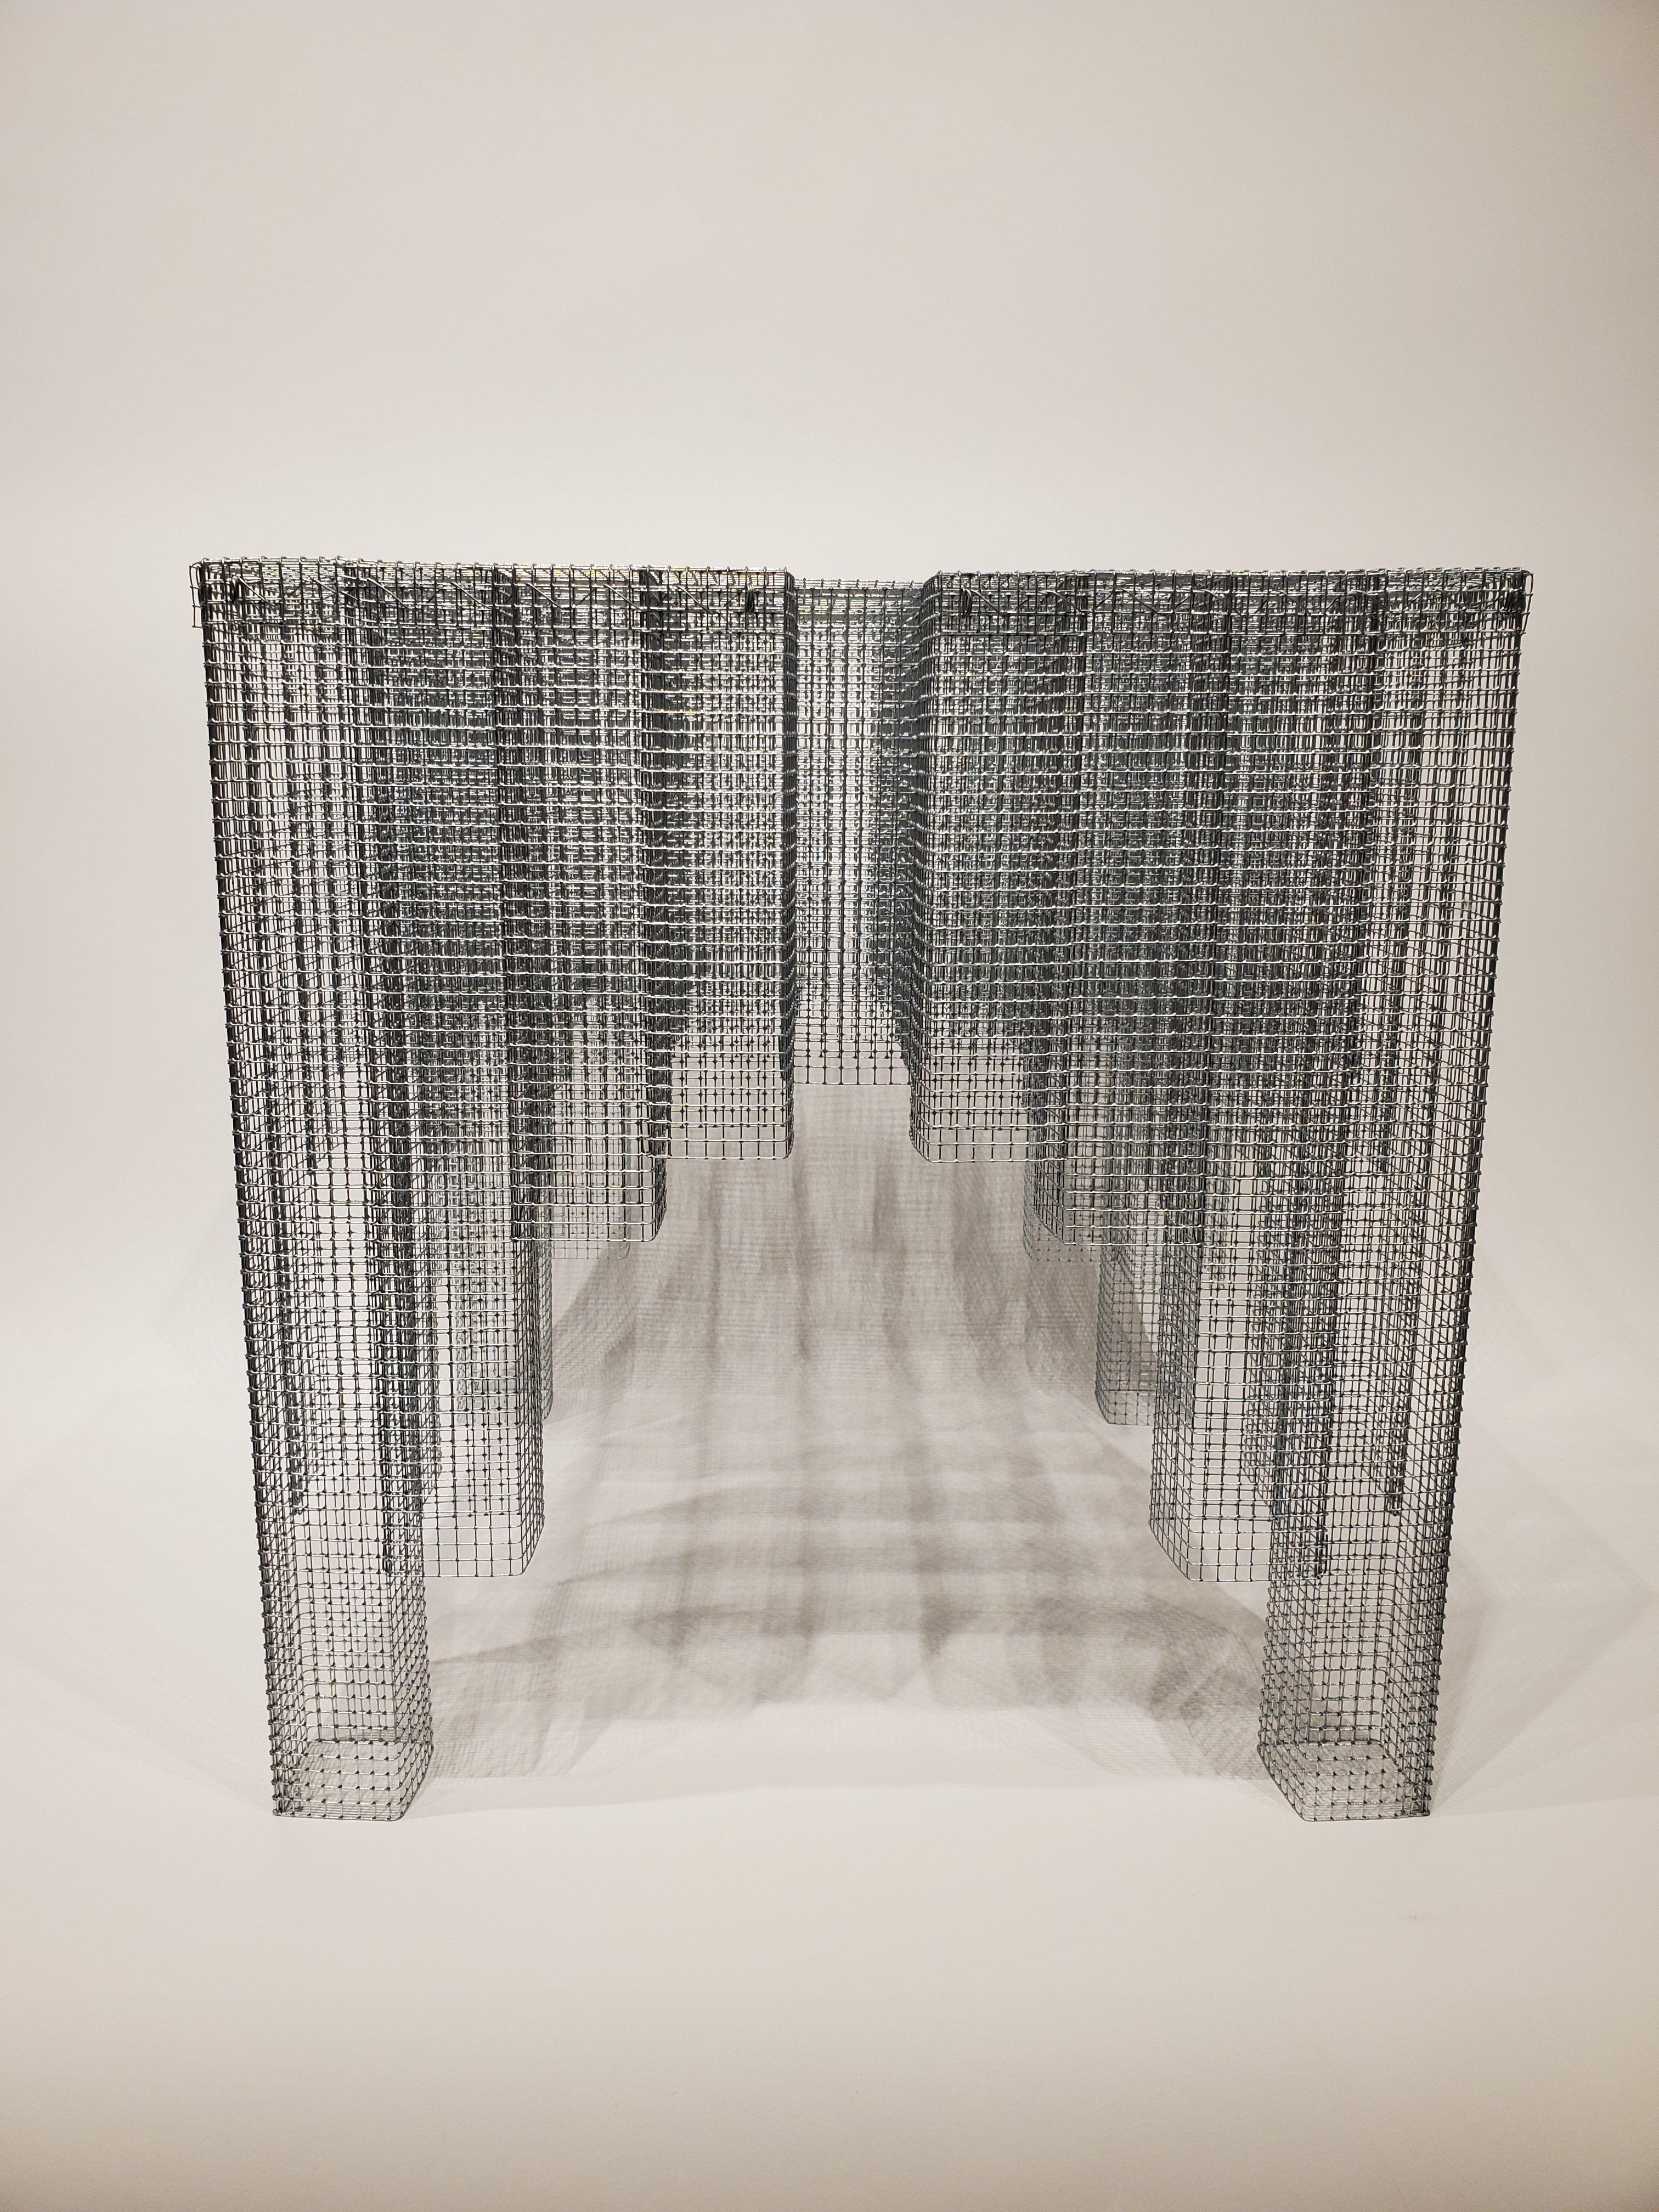 Voukenas Petrides
Blur table
Zinc-coated wire mesh,
2019

Voukenas Petrides is a design studio based in New York and Athens. Furniture designer Andreas Voukenas and architect Steven Petrides combine their talents to produce poetic furniture